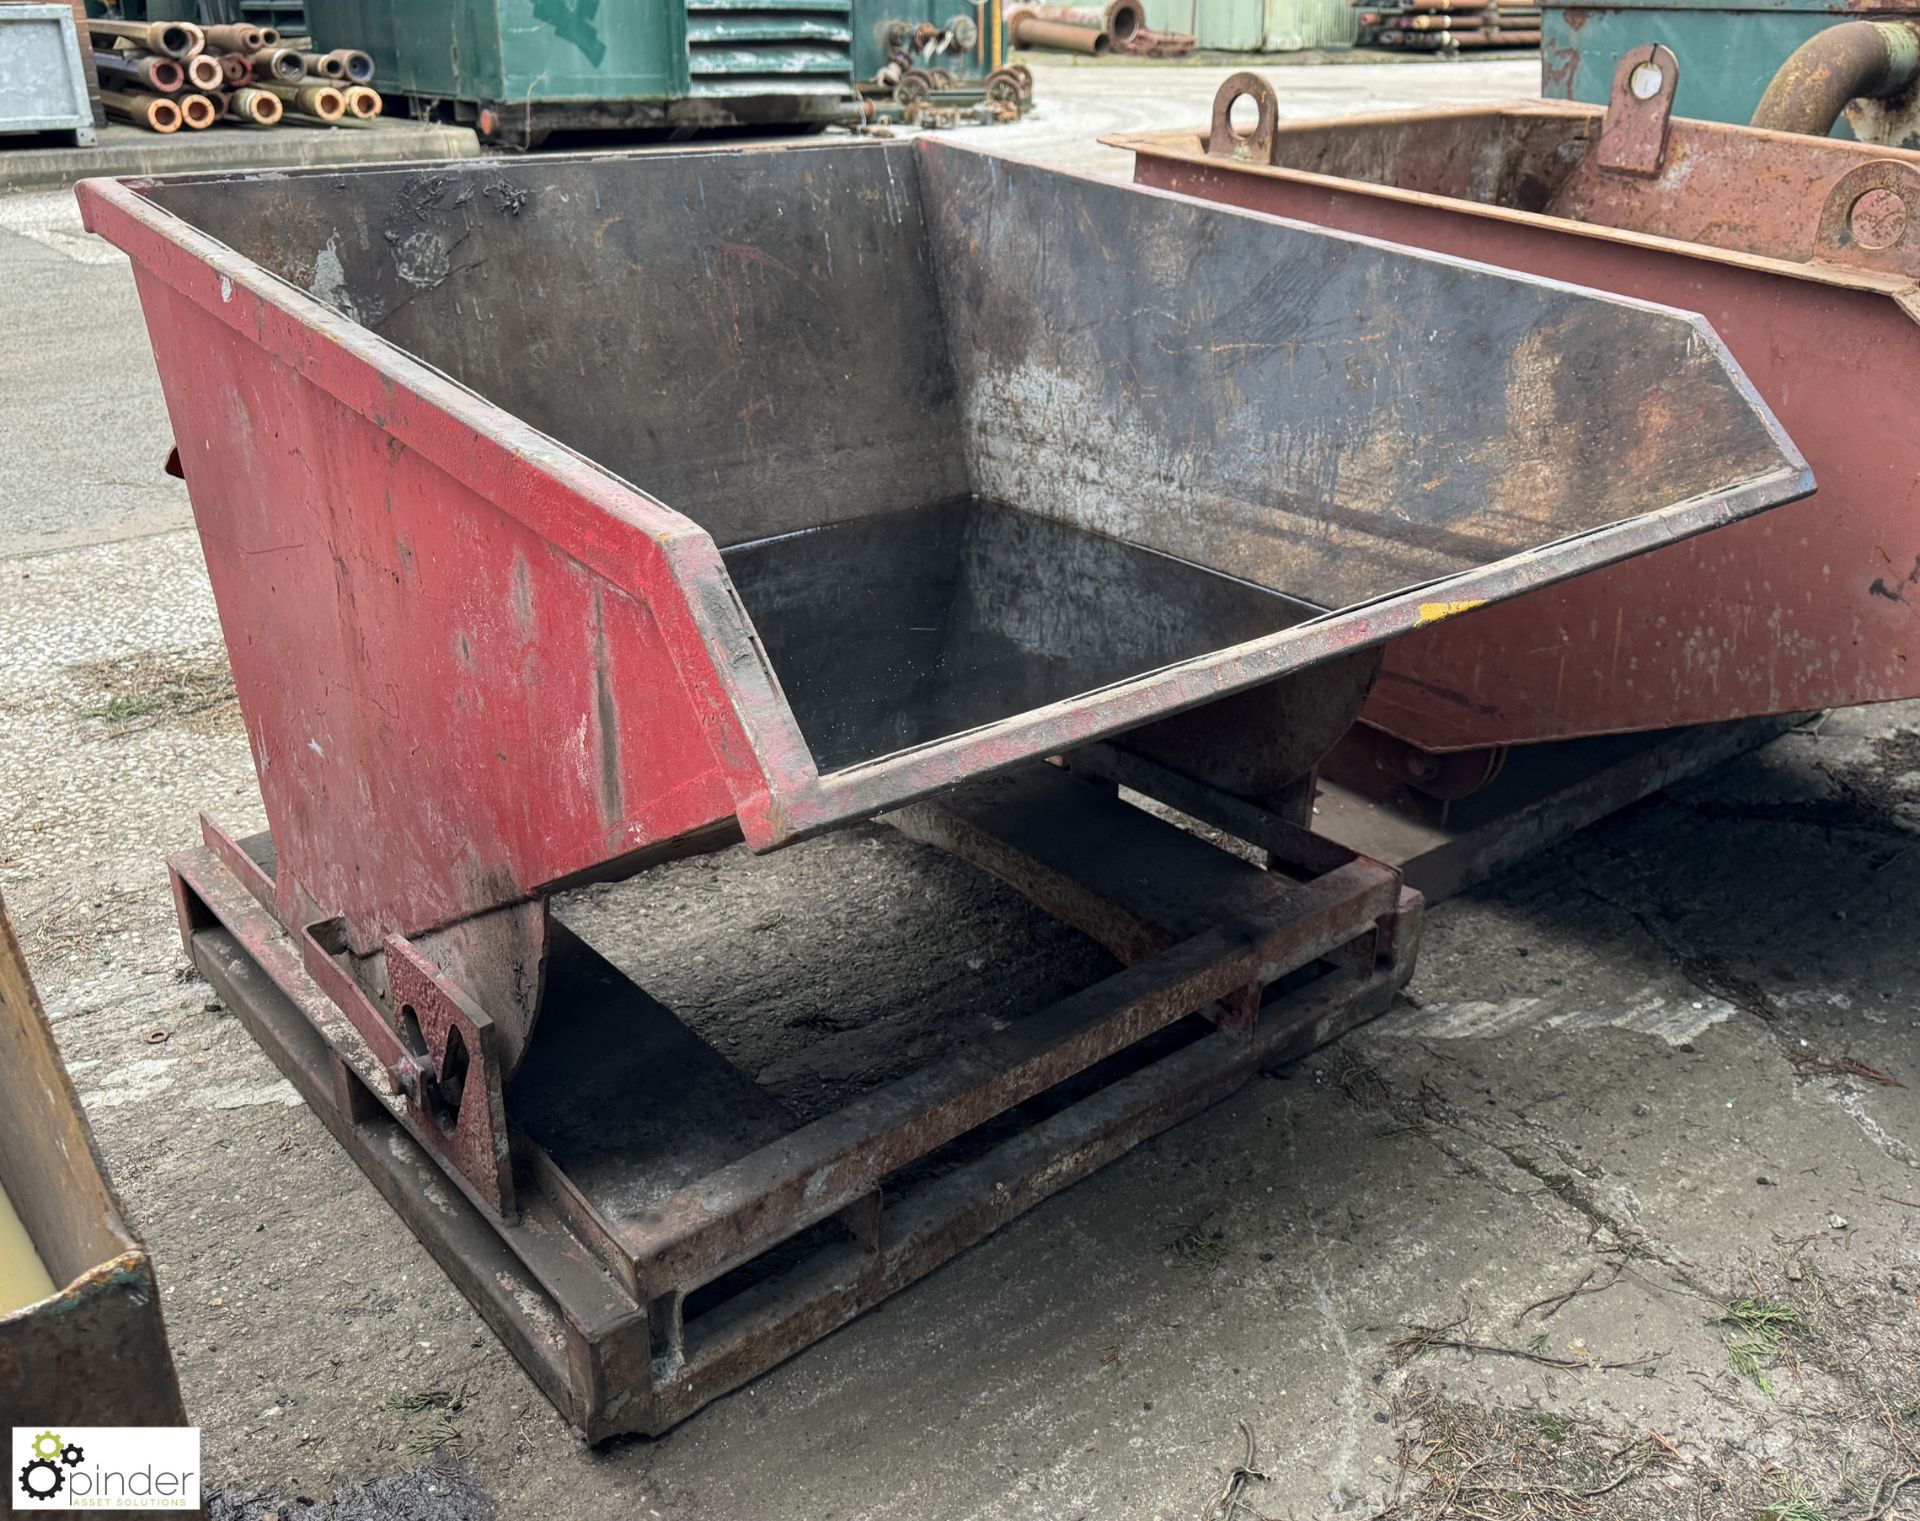 FLT mountable Tipping Skip, small